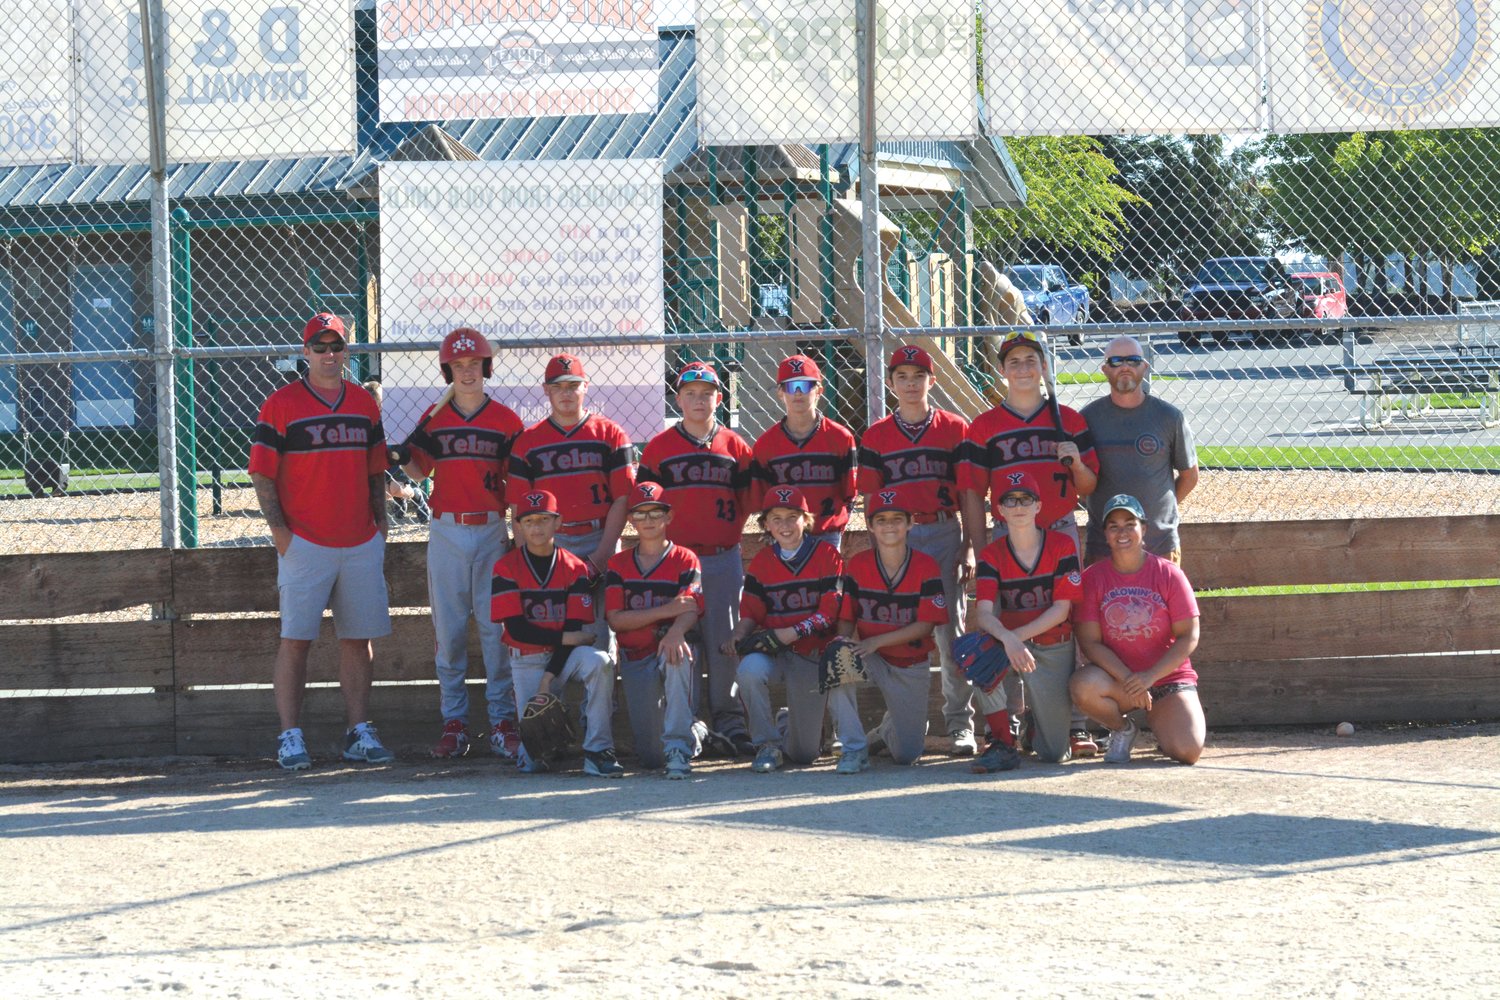 The Nisqually Basin 12U Yelm All Star team poses  for a photo.